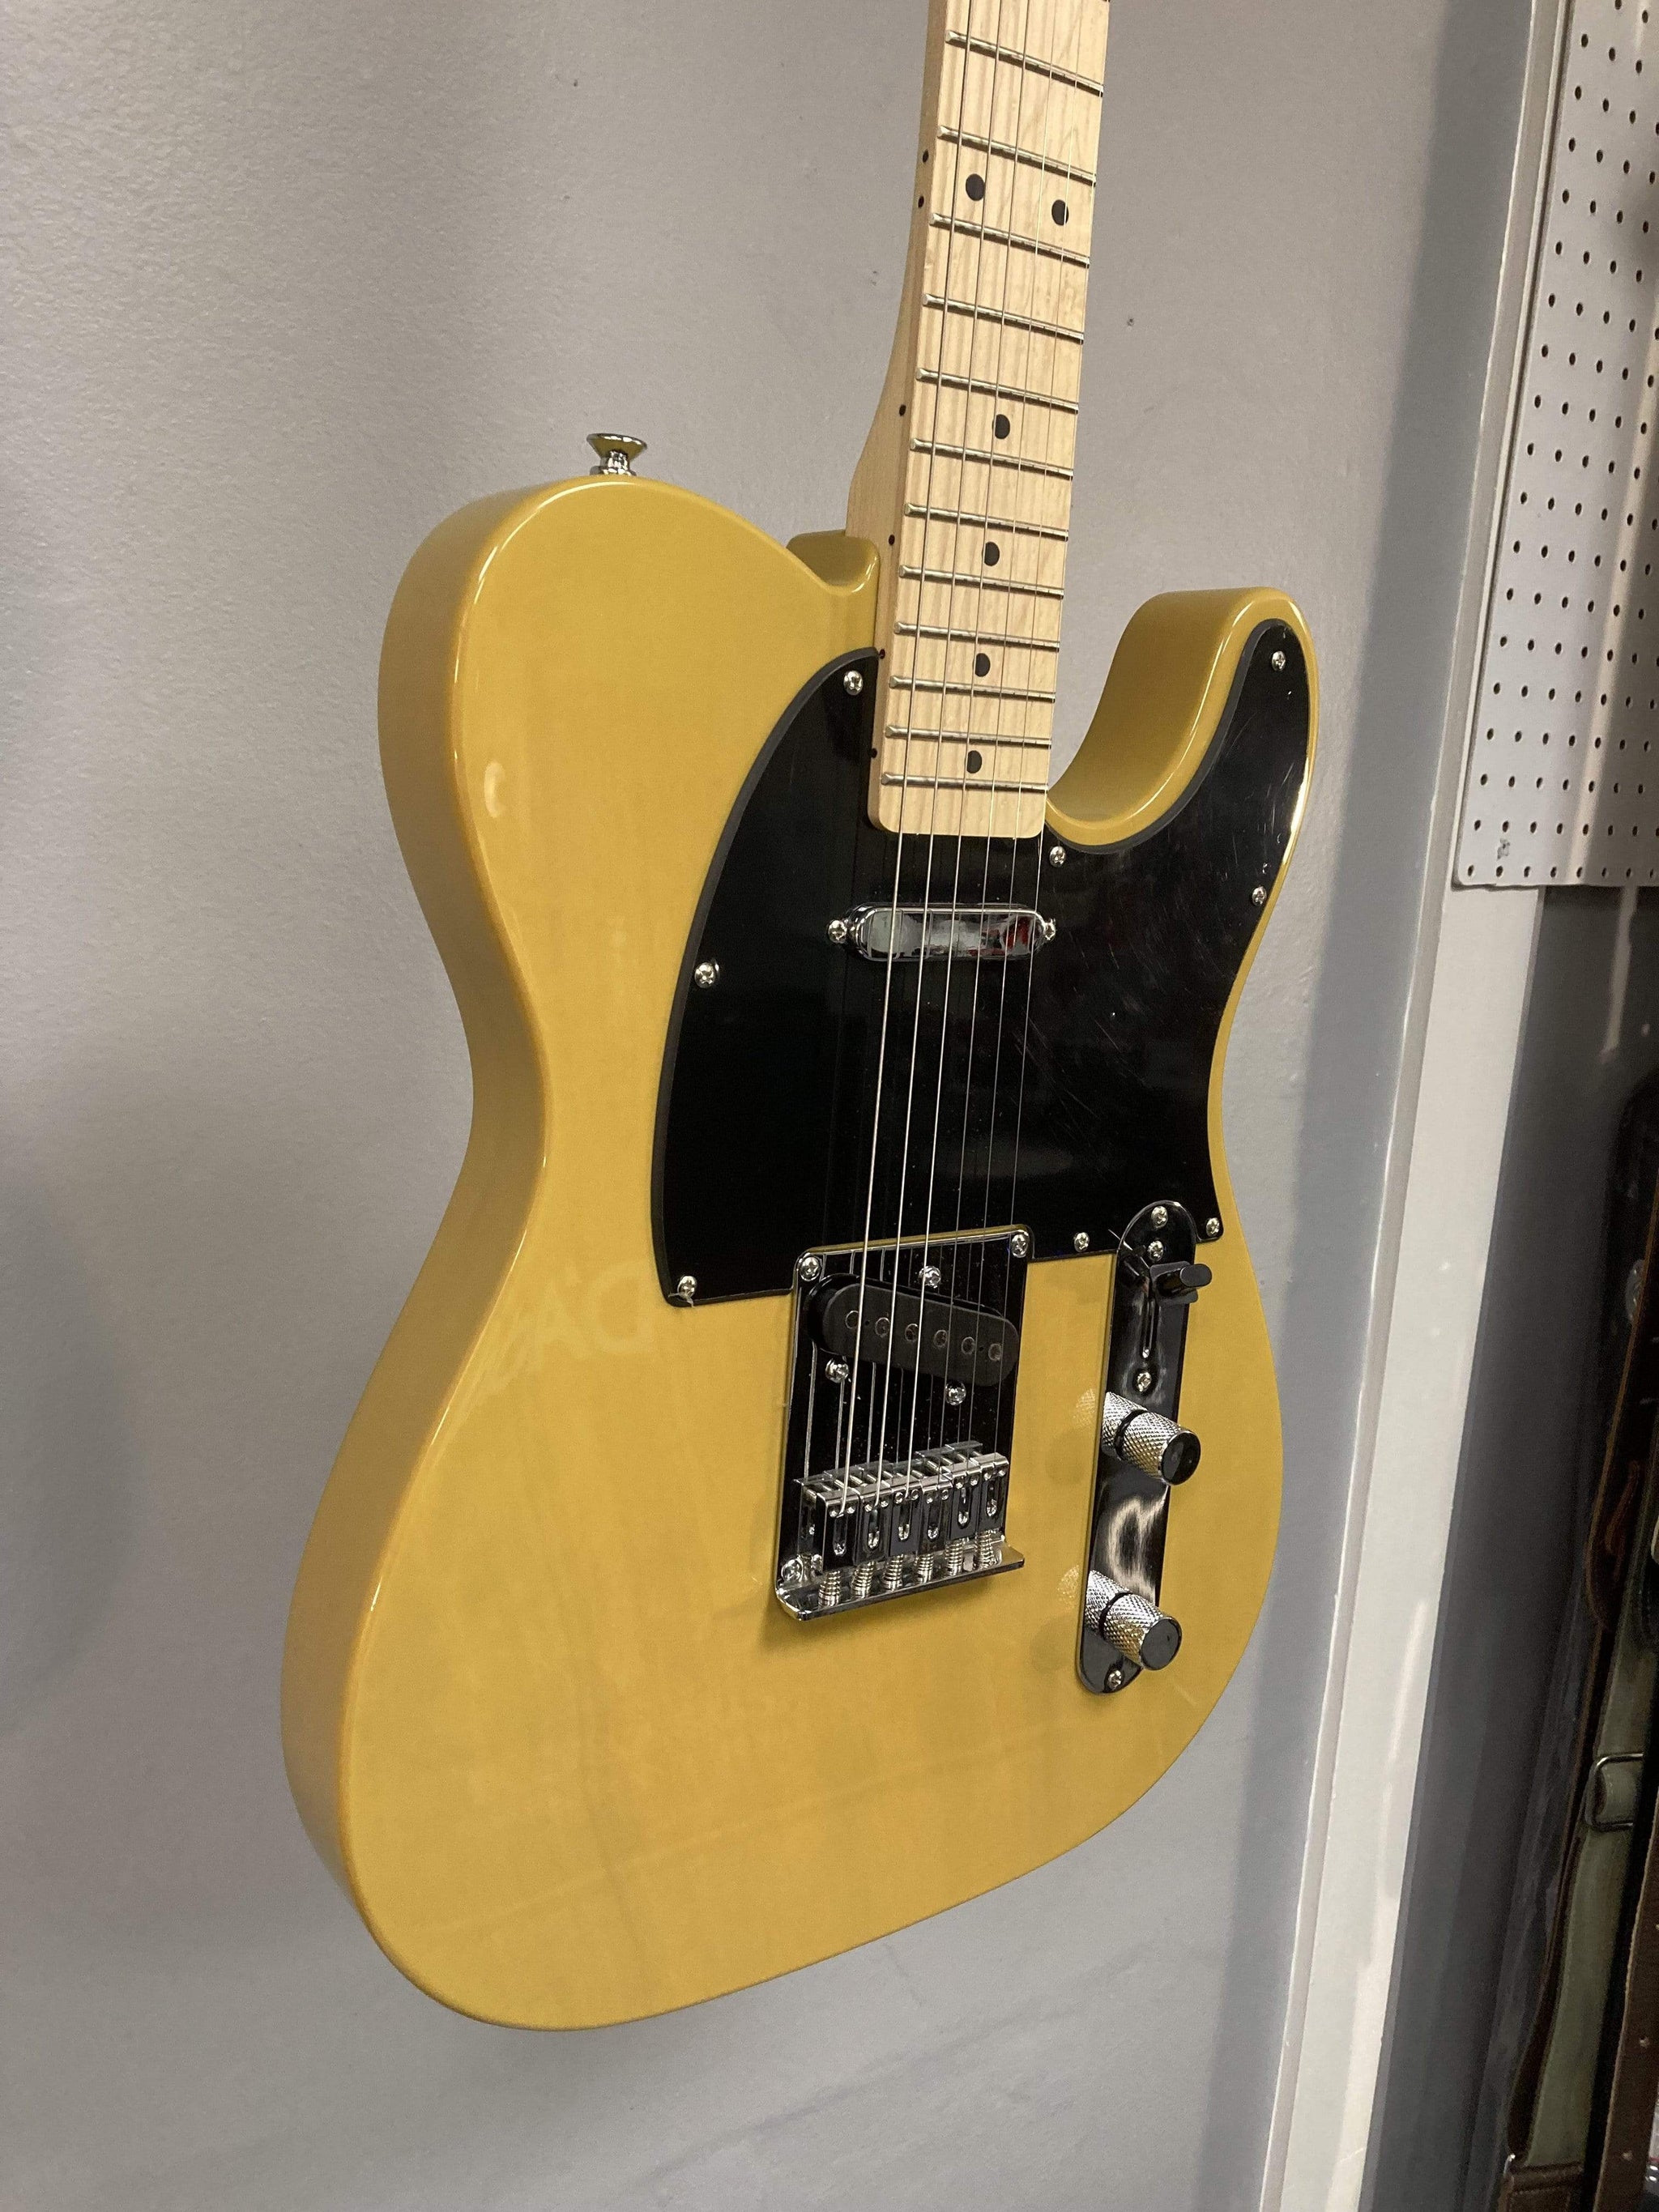 SQUIRE Affinity TELECASTER バタースコッチブロンド-